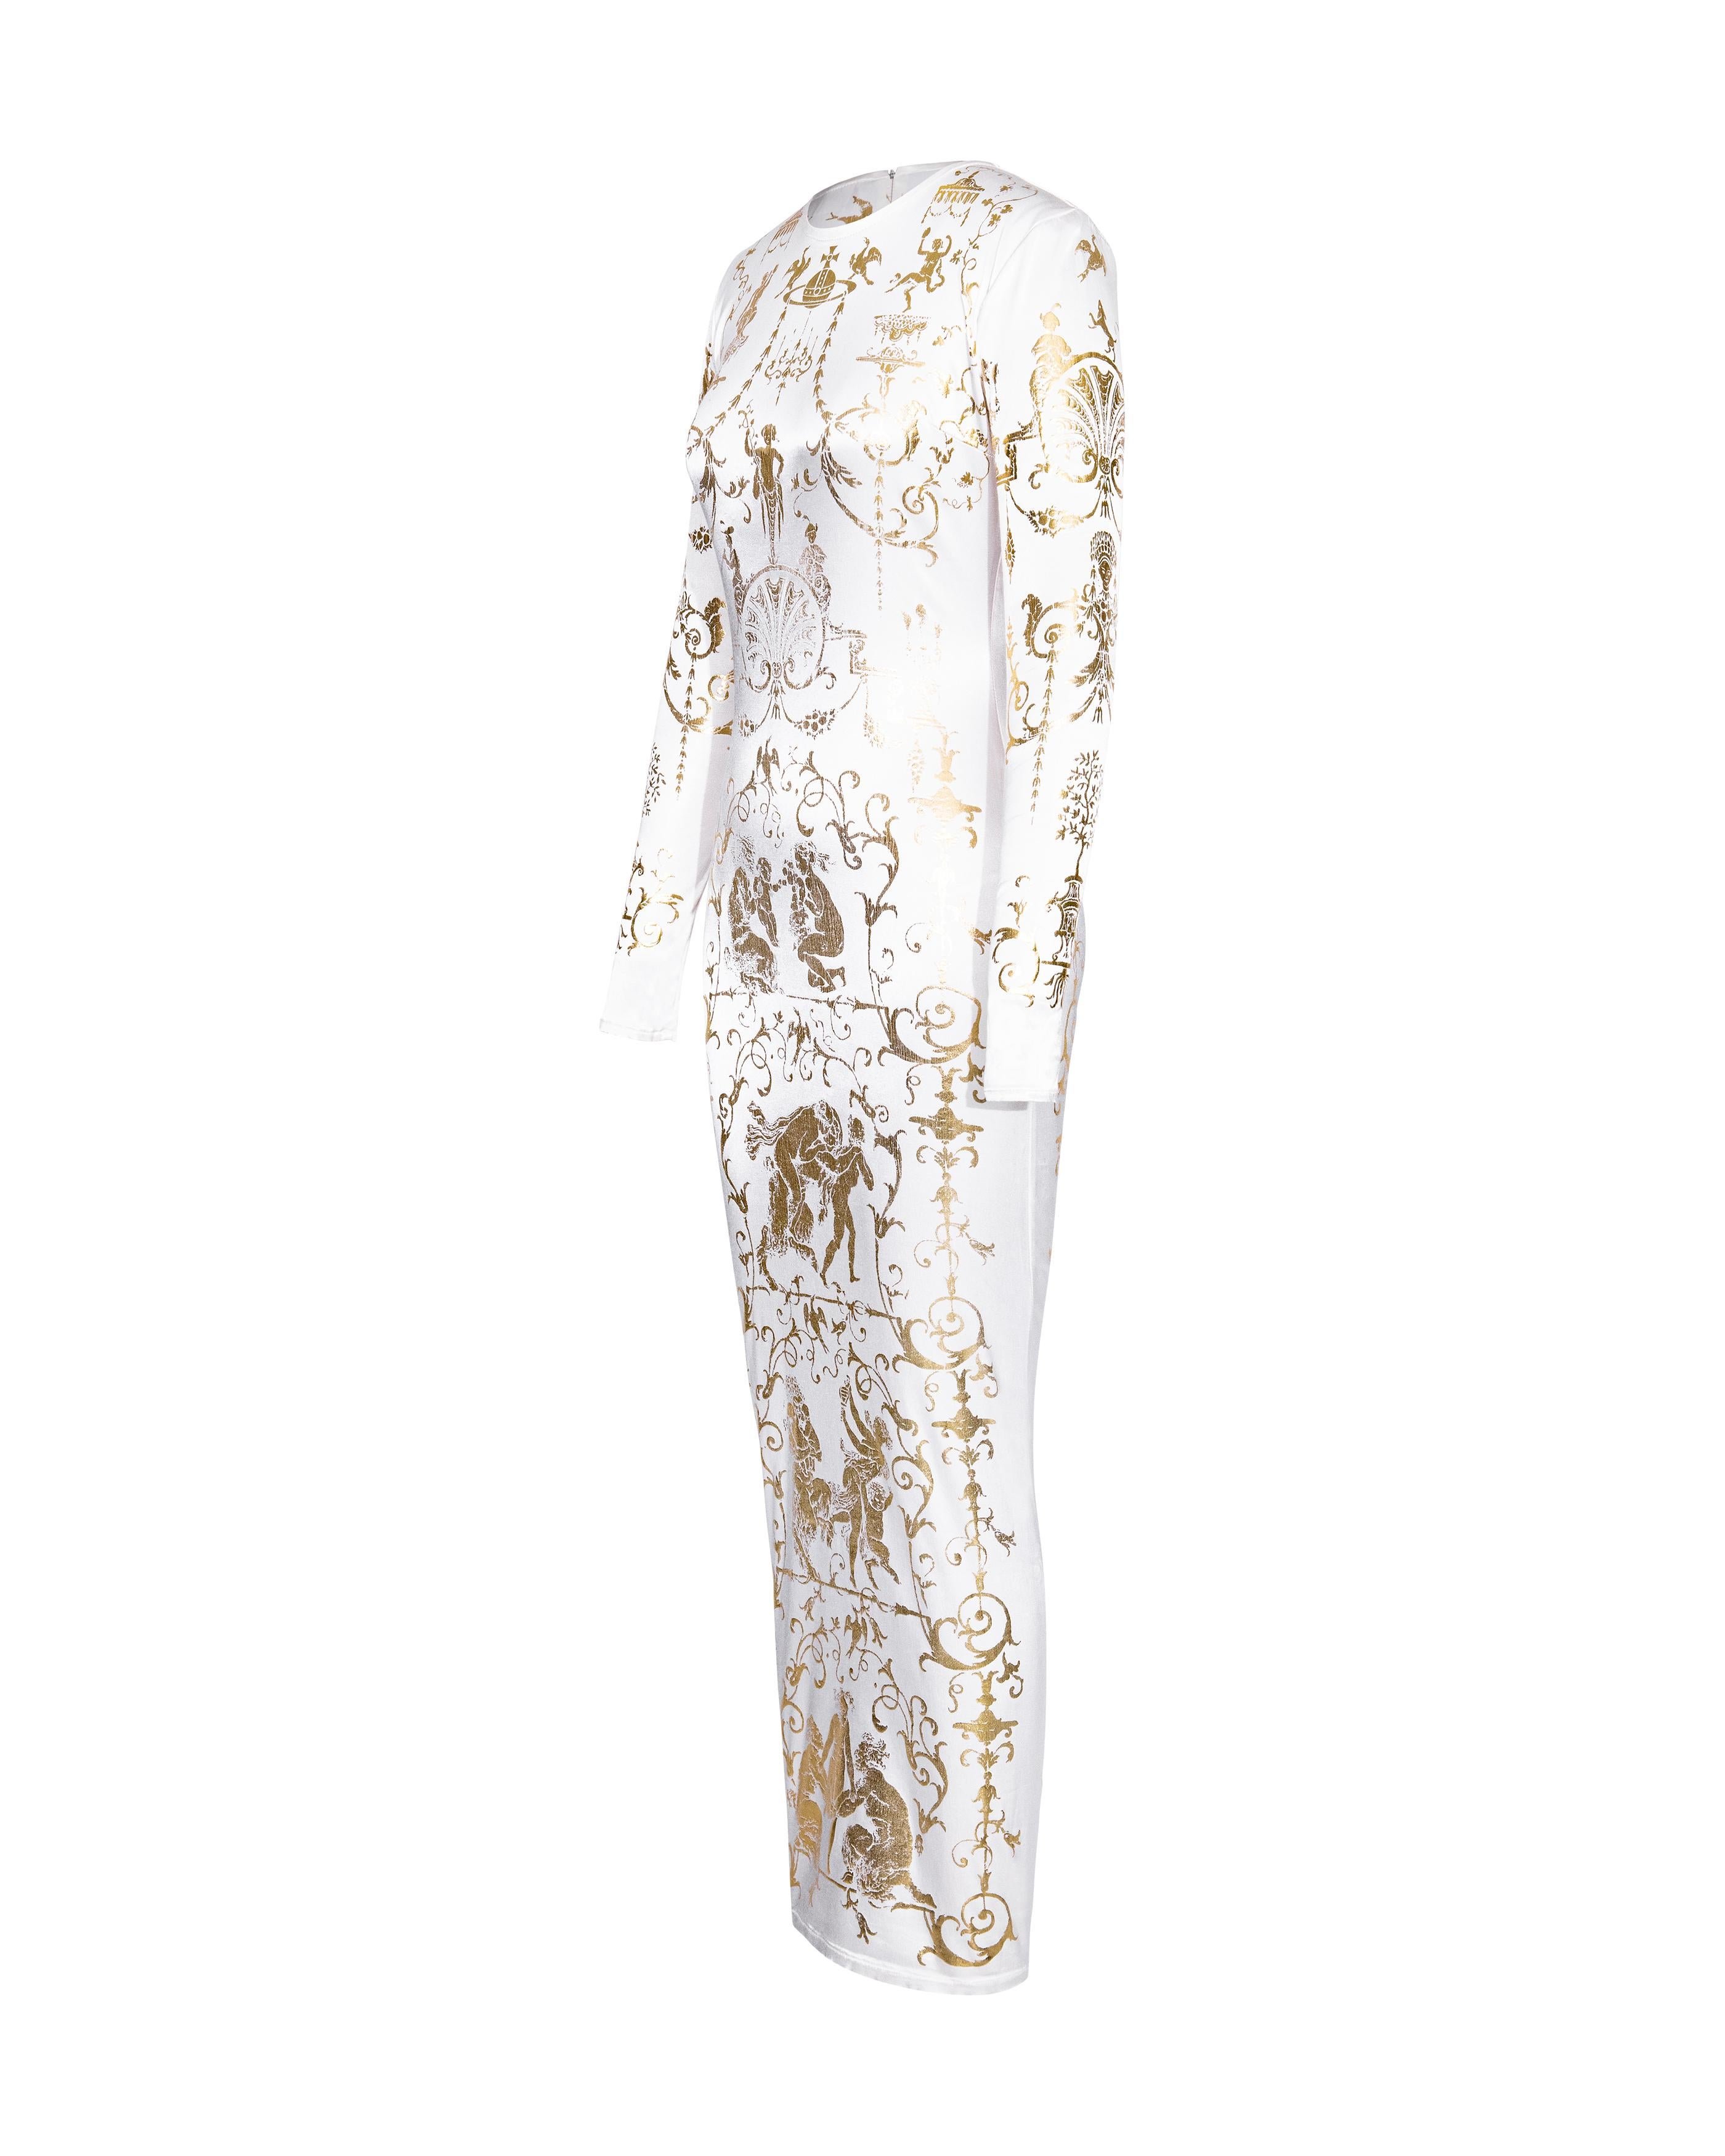 A/W 1991 Vivienne Westwood White and Gold Boulle Print Gown In Good Condition For Sale In North Hollywood, CA